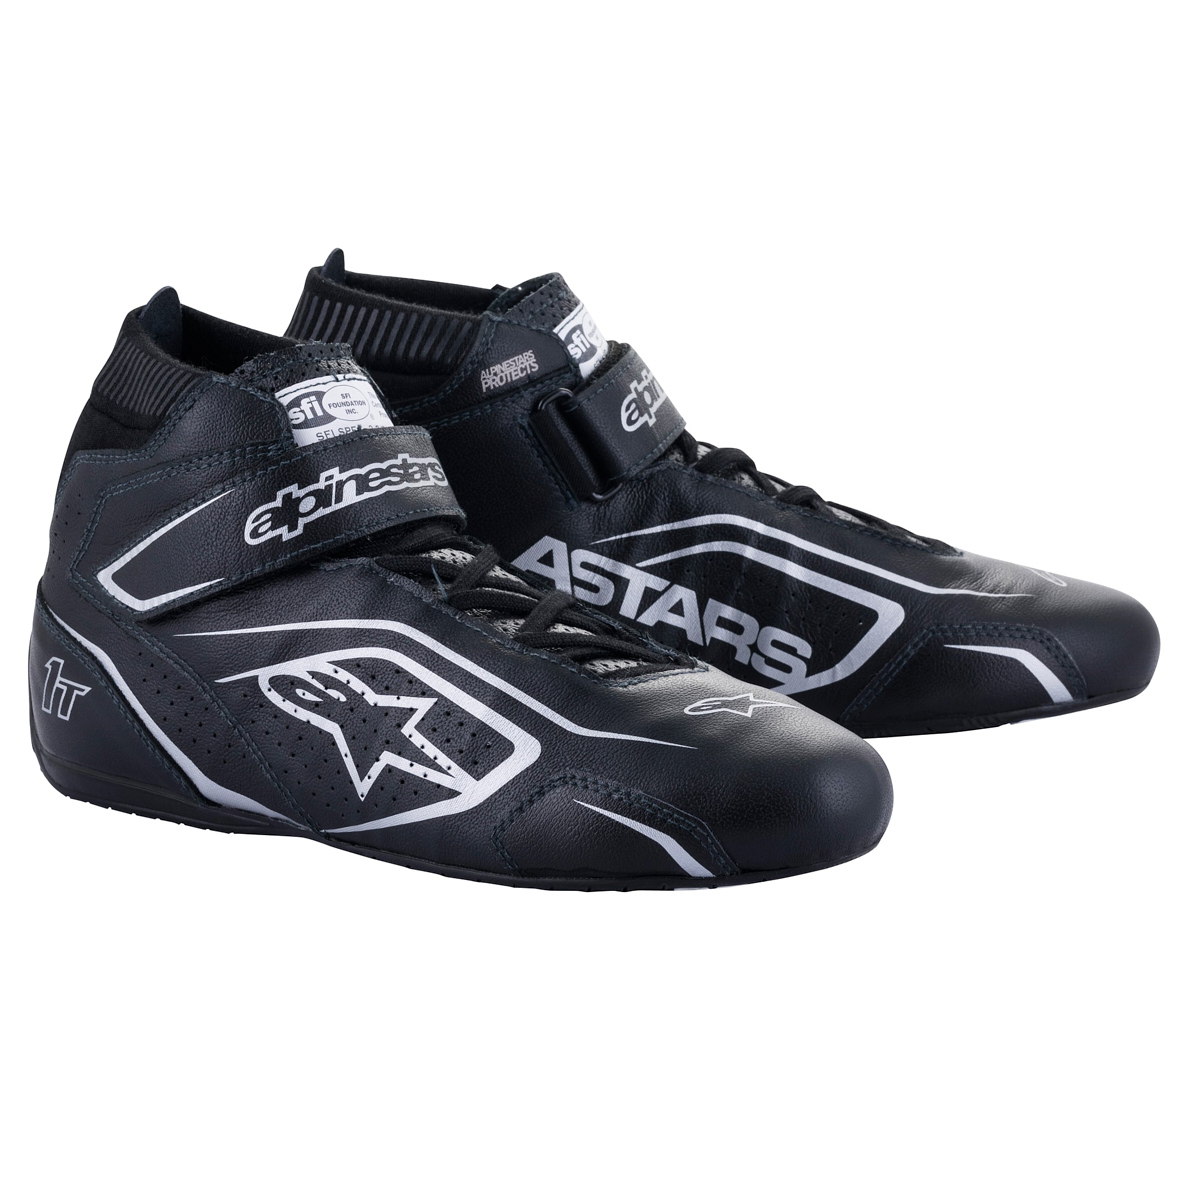 Alpinestars 2710122-119-13 Driving Shoe, Tech 1-T V3, Mid-Top, SFI 3.3, Leather Outer, Nomex Inner, Black / Silver, Size 13, Pair